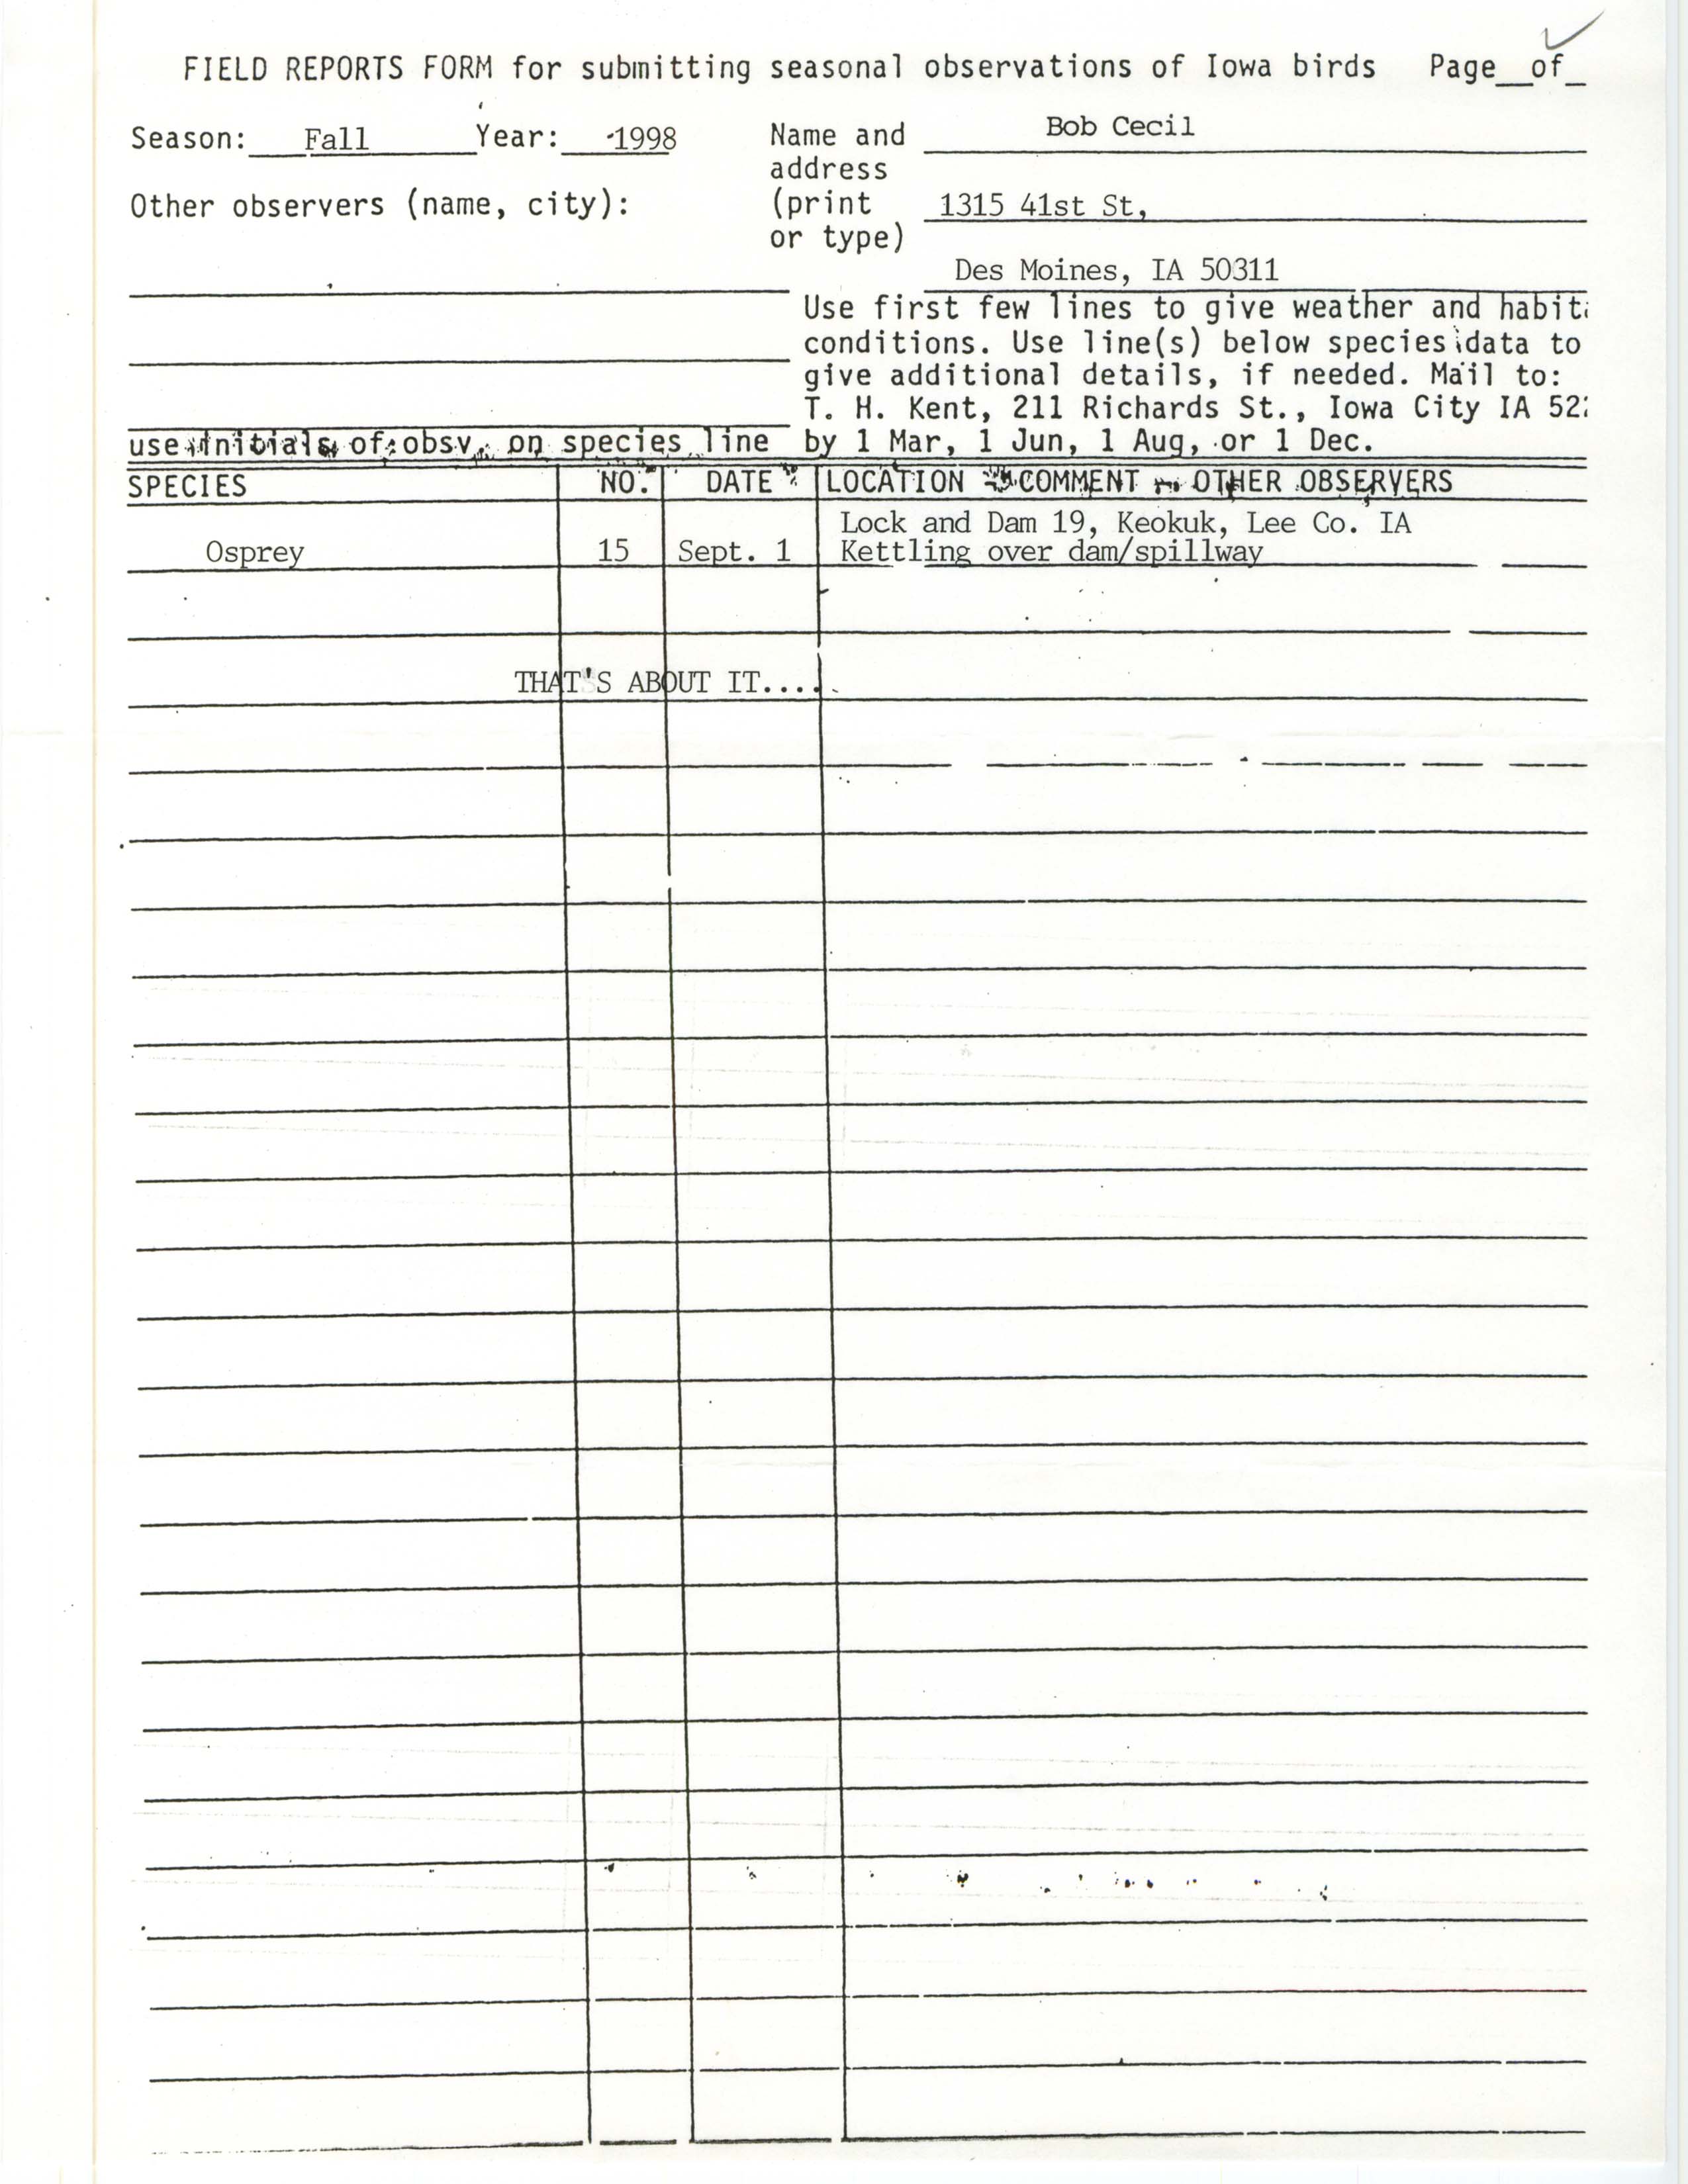 Field reports form for submitting seasonal observations of Iowa birds, Robert I. Cecil, fall 1998